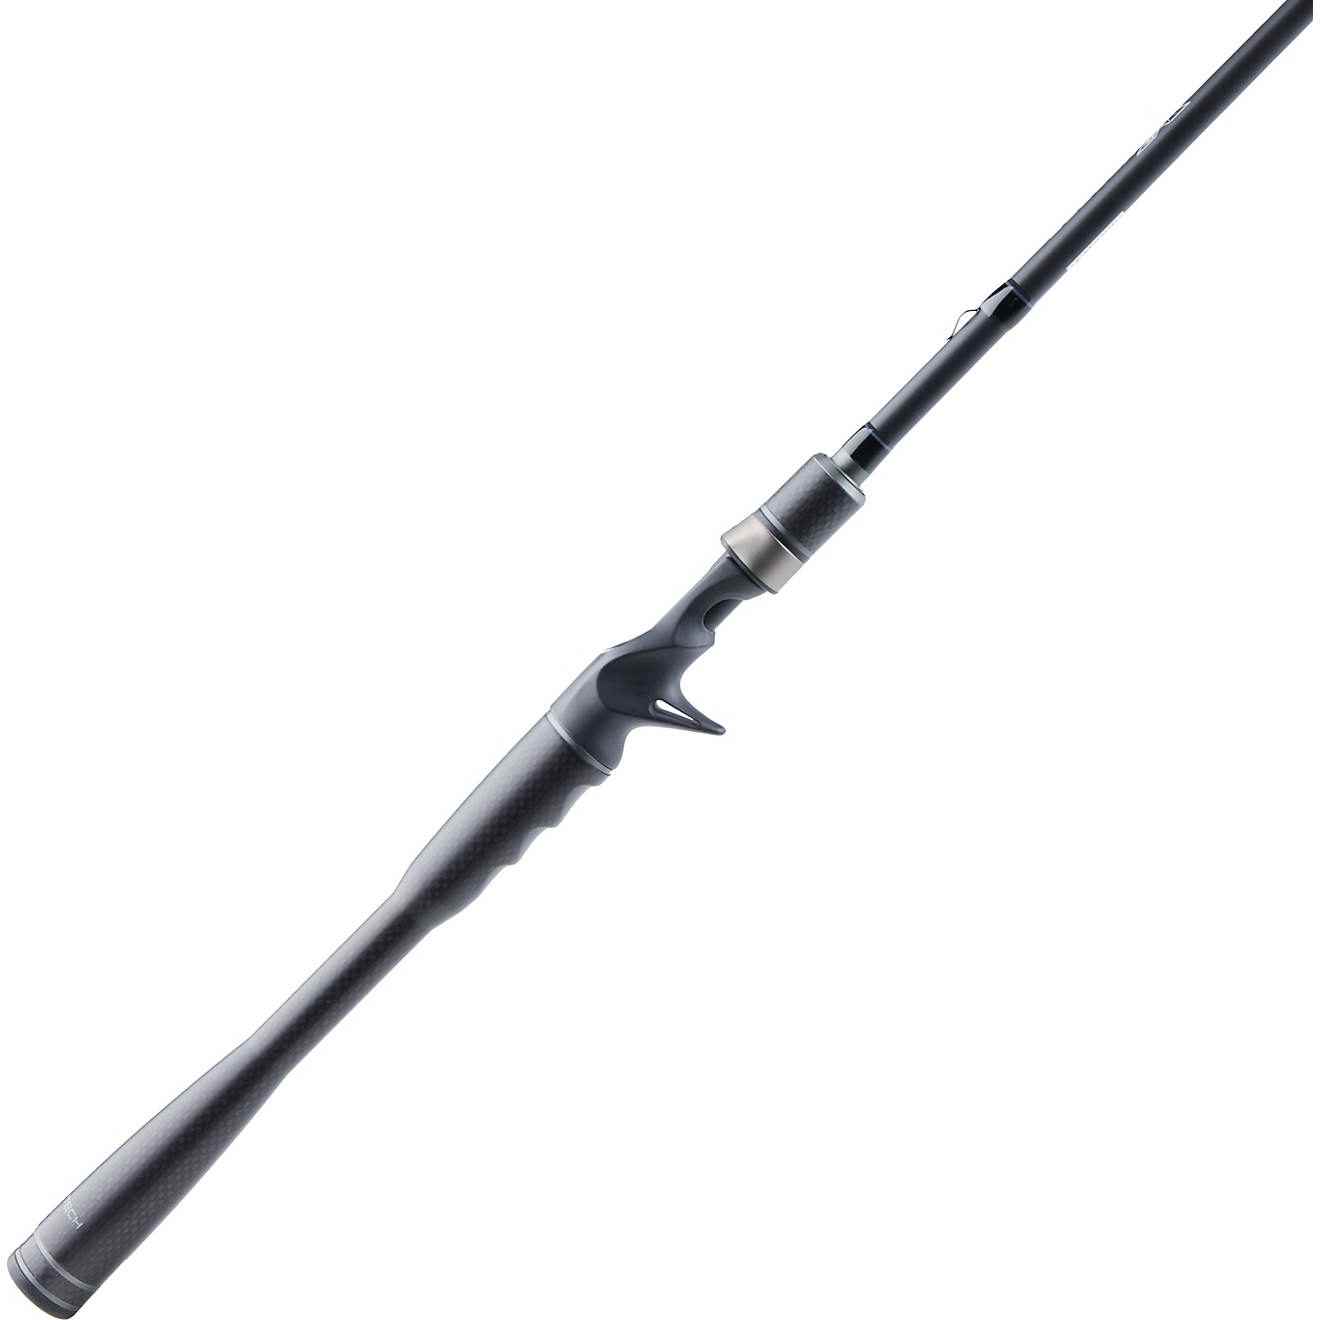 Anyone tried the new H2O Xpress Tac 40 rod? - Fishing Rods, Reels